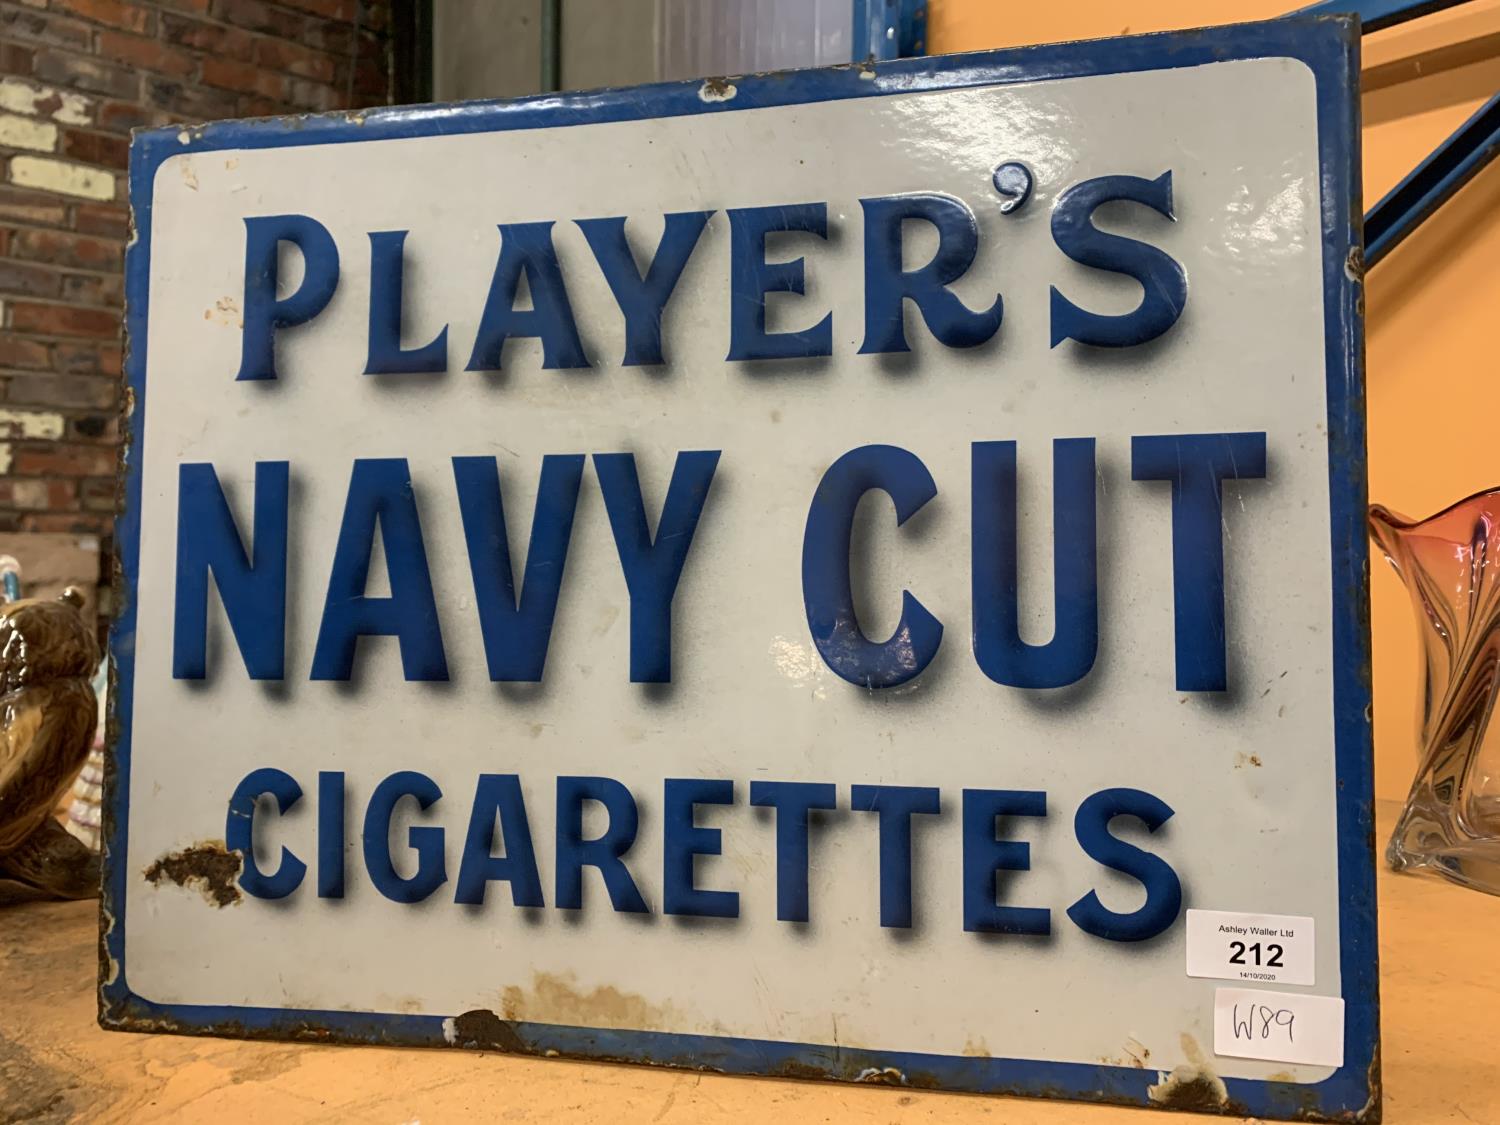 A VINTAGE ENAMEL DOUBLE SIDED SIGN "PLAYERS NAVY CUTY CIGARETTES"